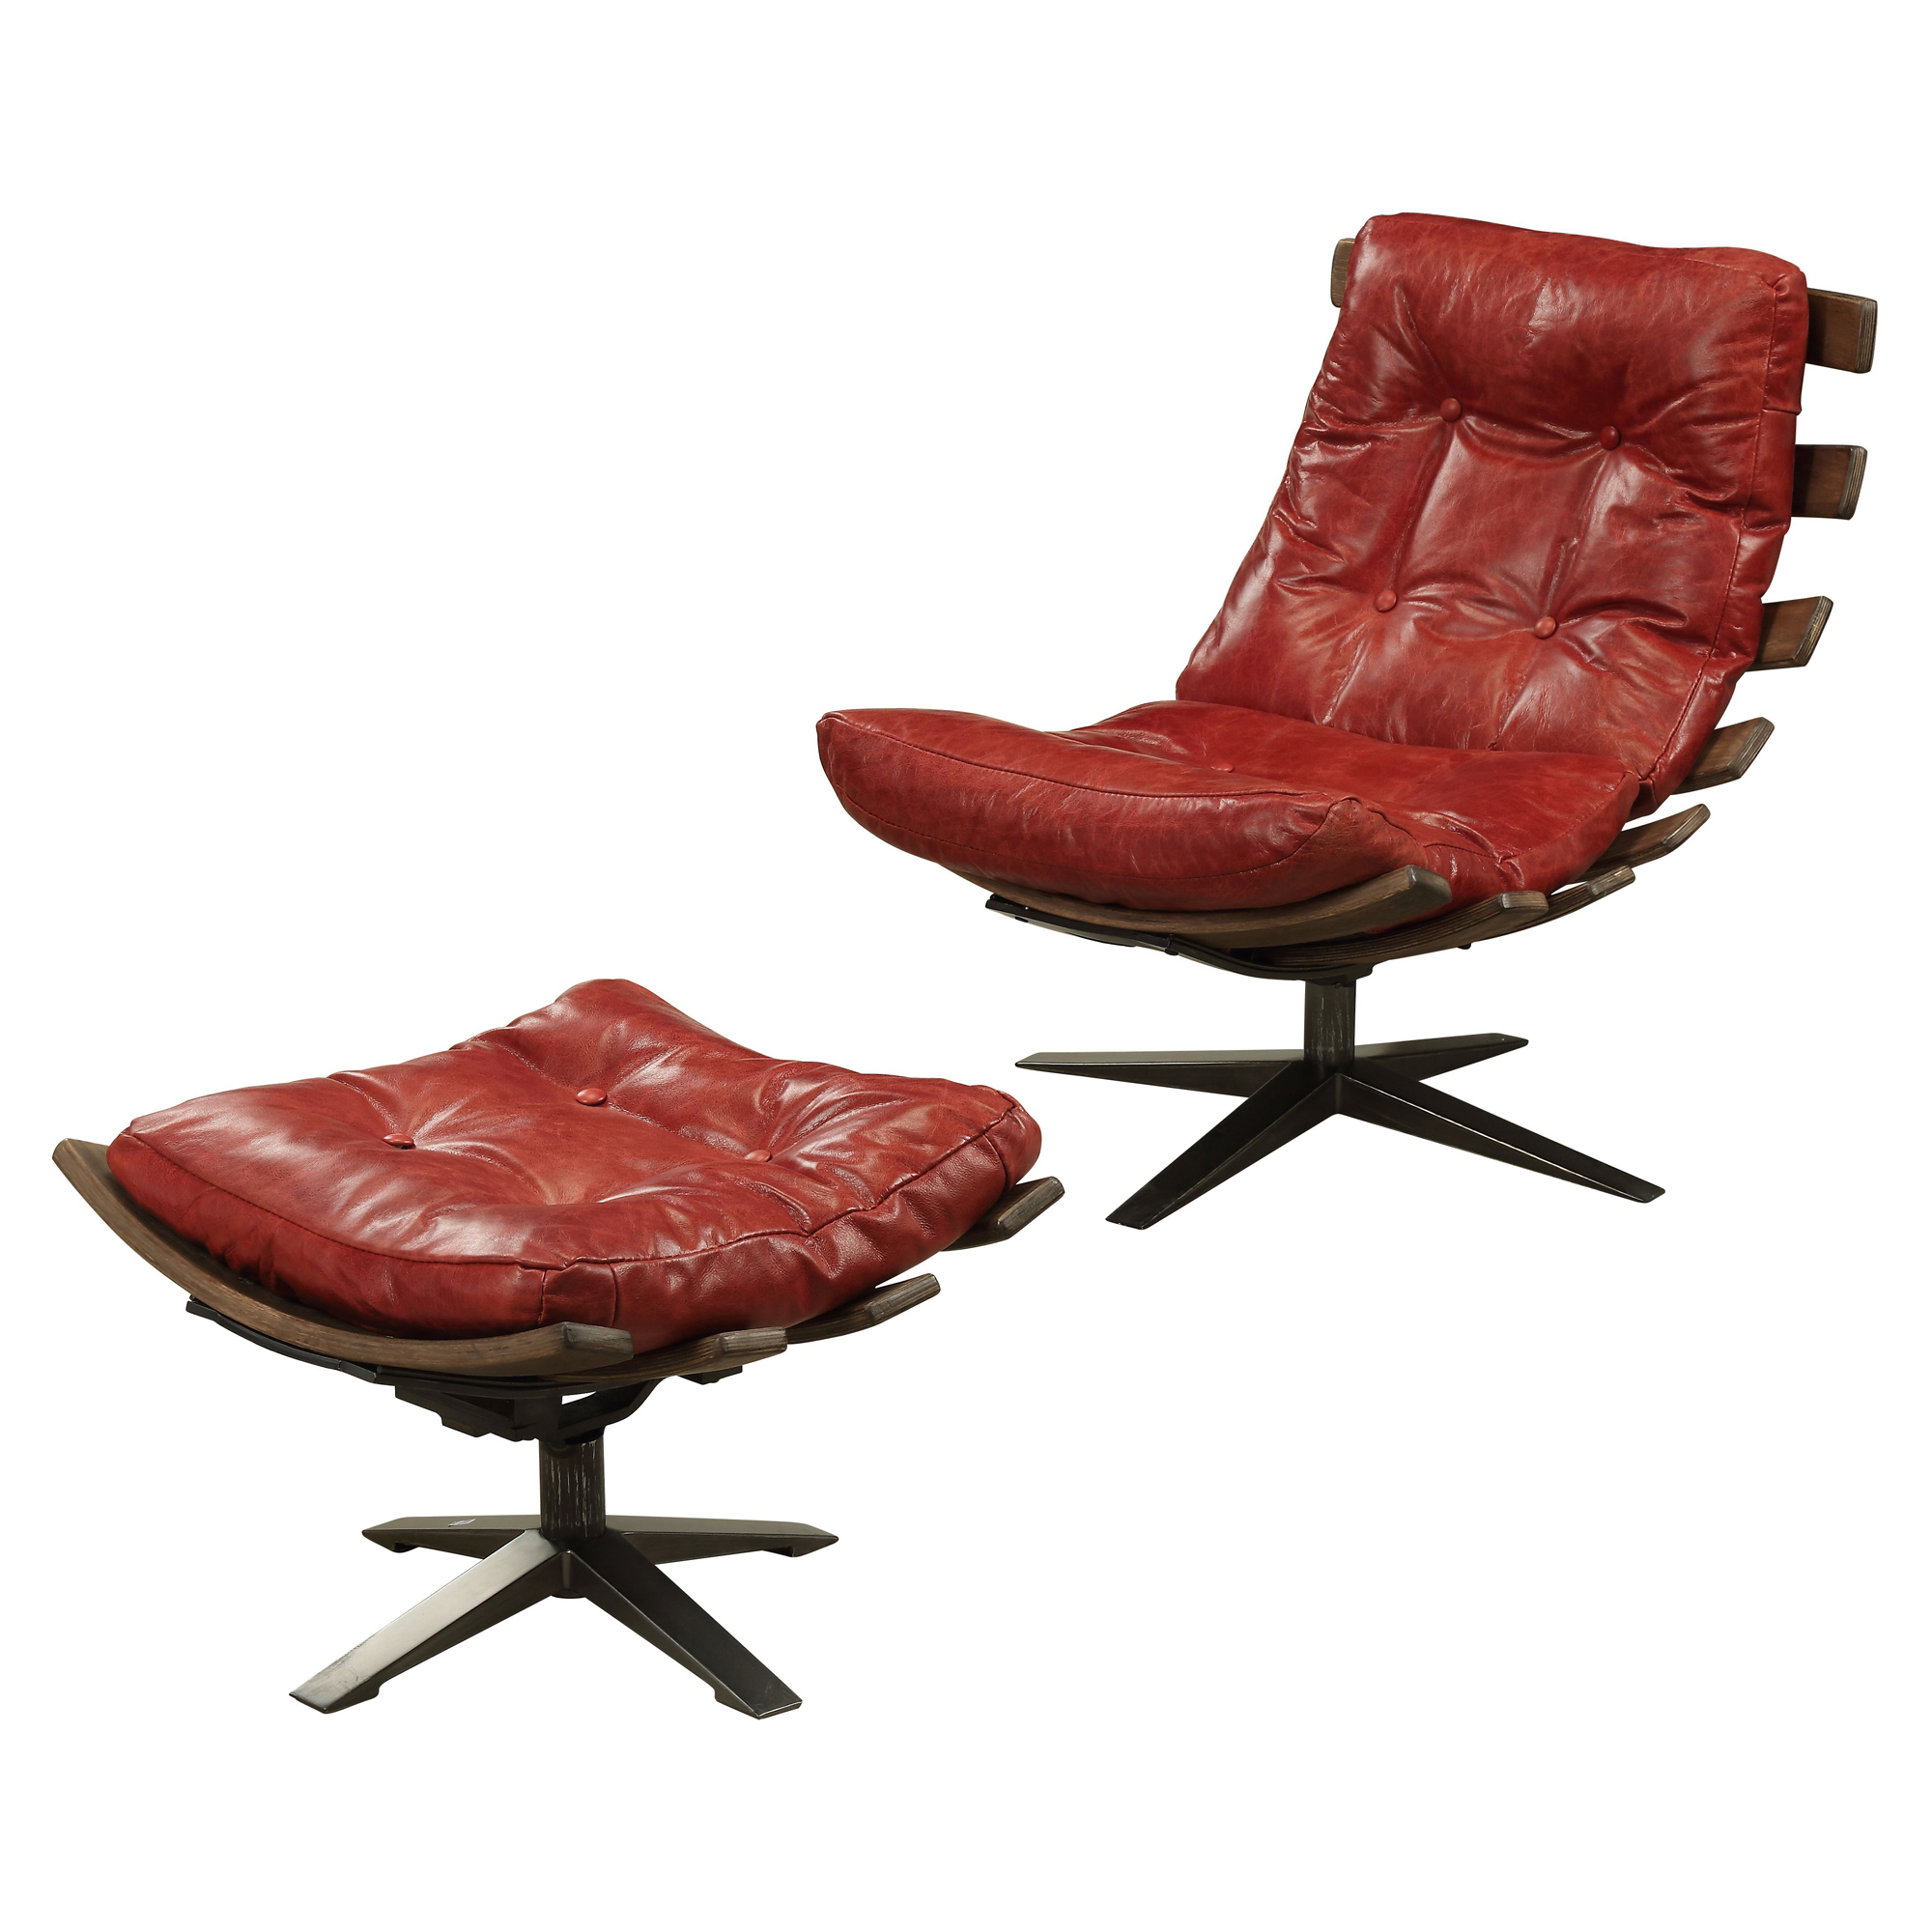 ACME Gandy 2-piece Chair and Ottoman Set in Antique Red and Brown - image 1 of 8